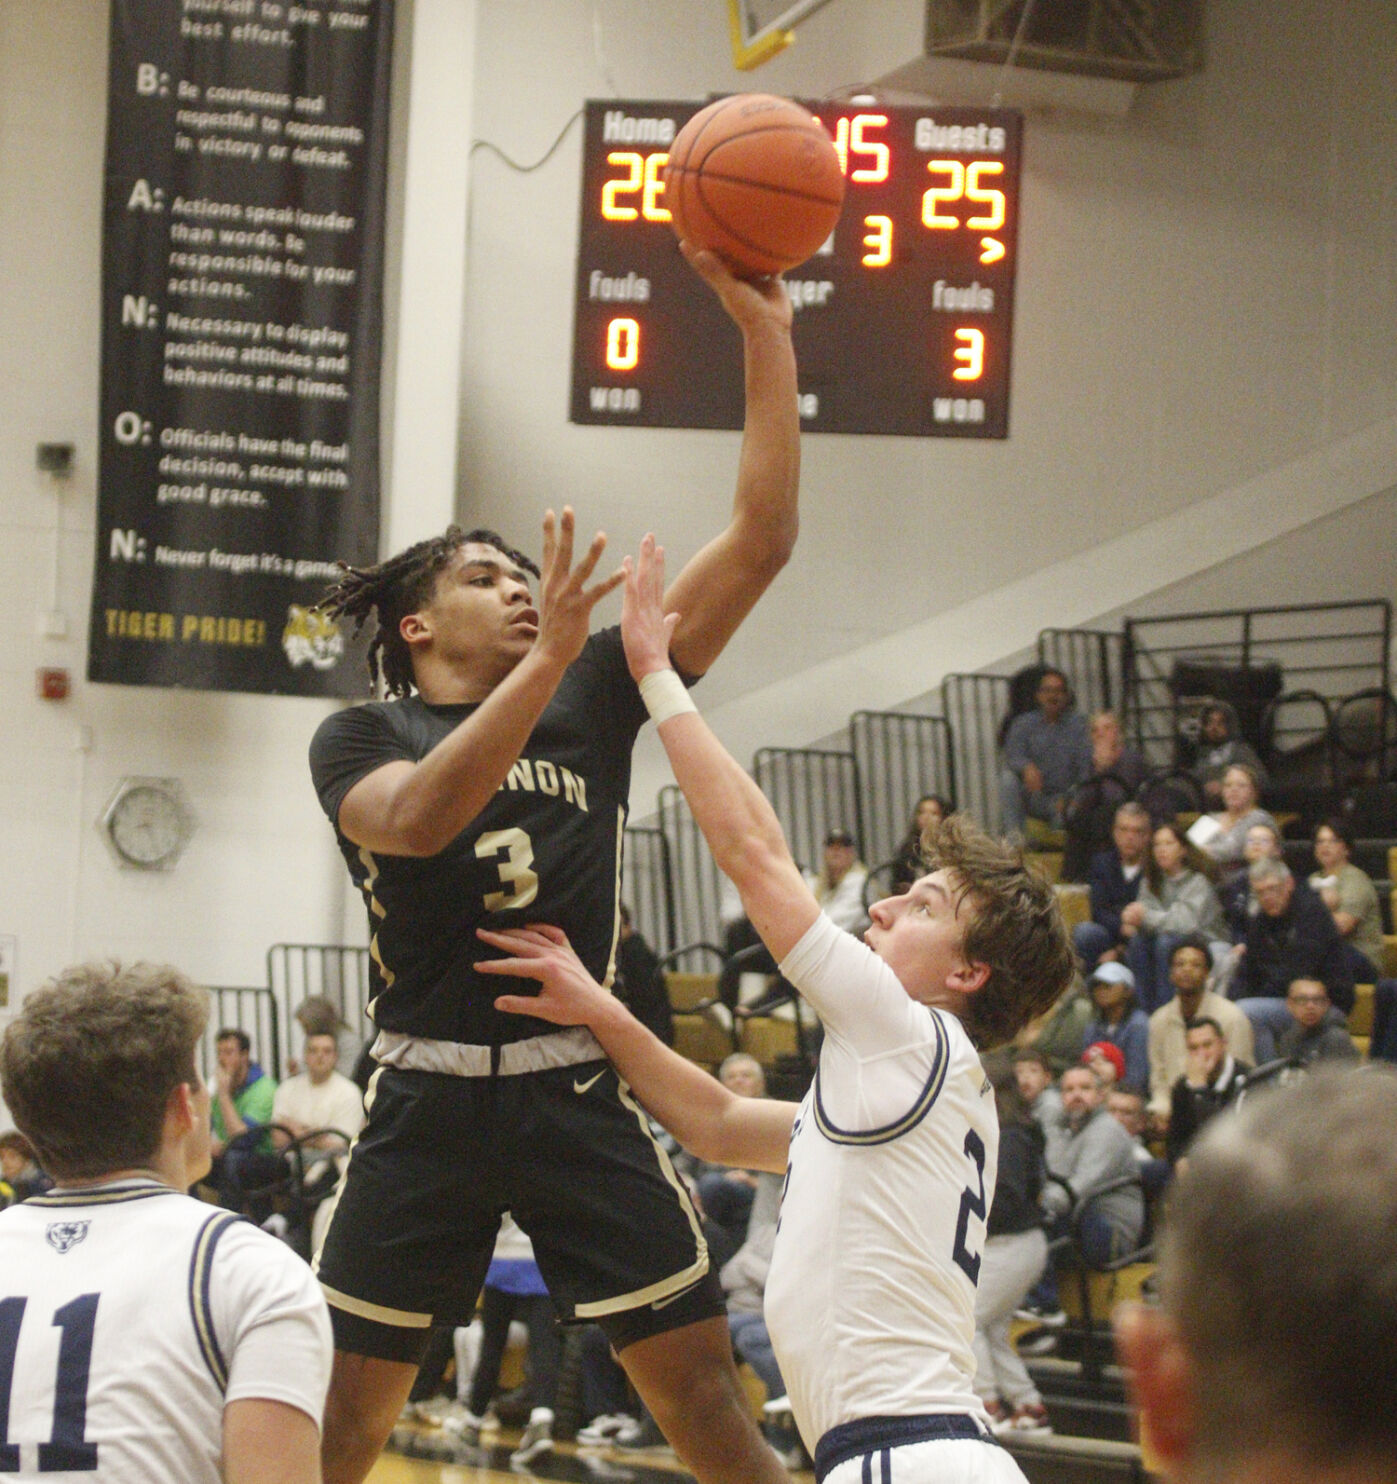 Lebanon boys’ basketball team outplays Tri-West in sectional semifinals with clutch defense and free-throw advantage